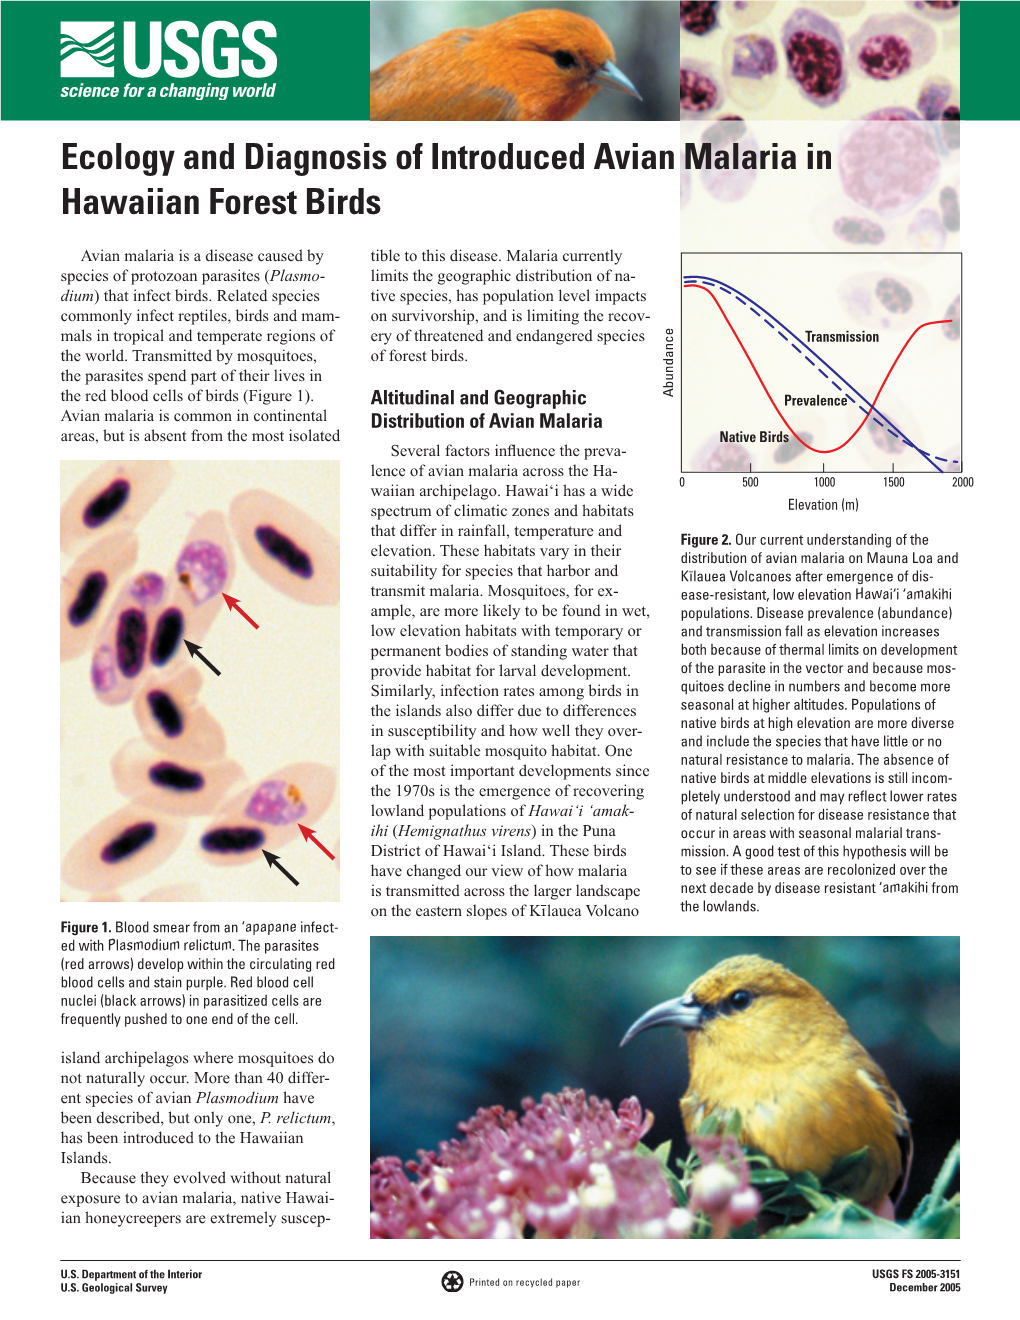 Ecology and Diagnosis of Introduced Avian Malaria in Hawaiian Forest Birds